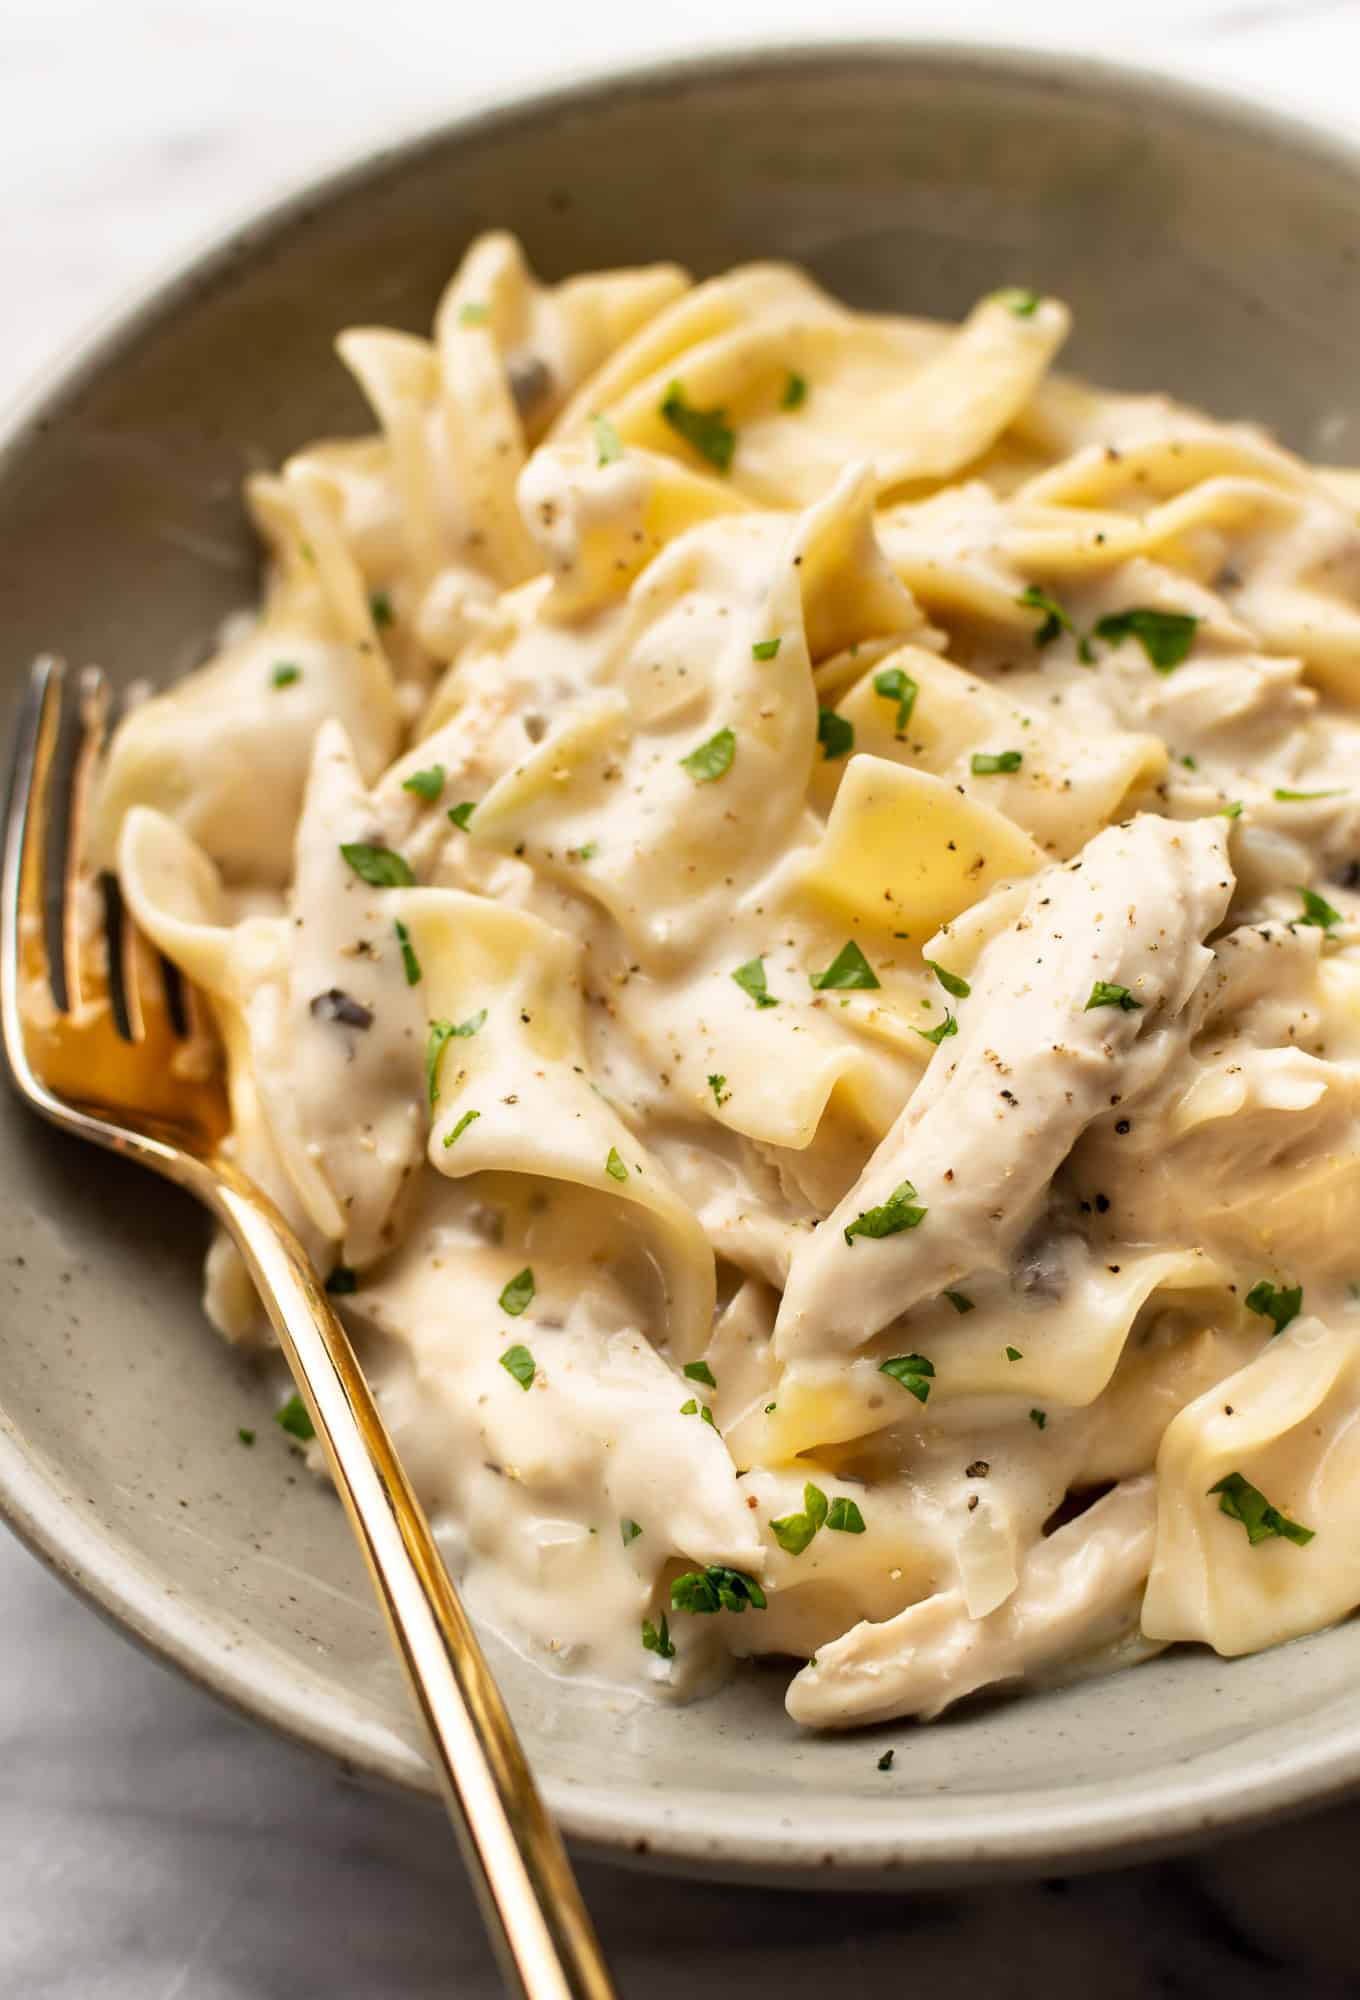 Creamy Chicken And Egg Noodles Recipe: Delicious One-Pot Comfort